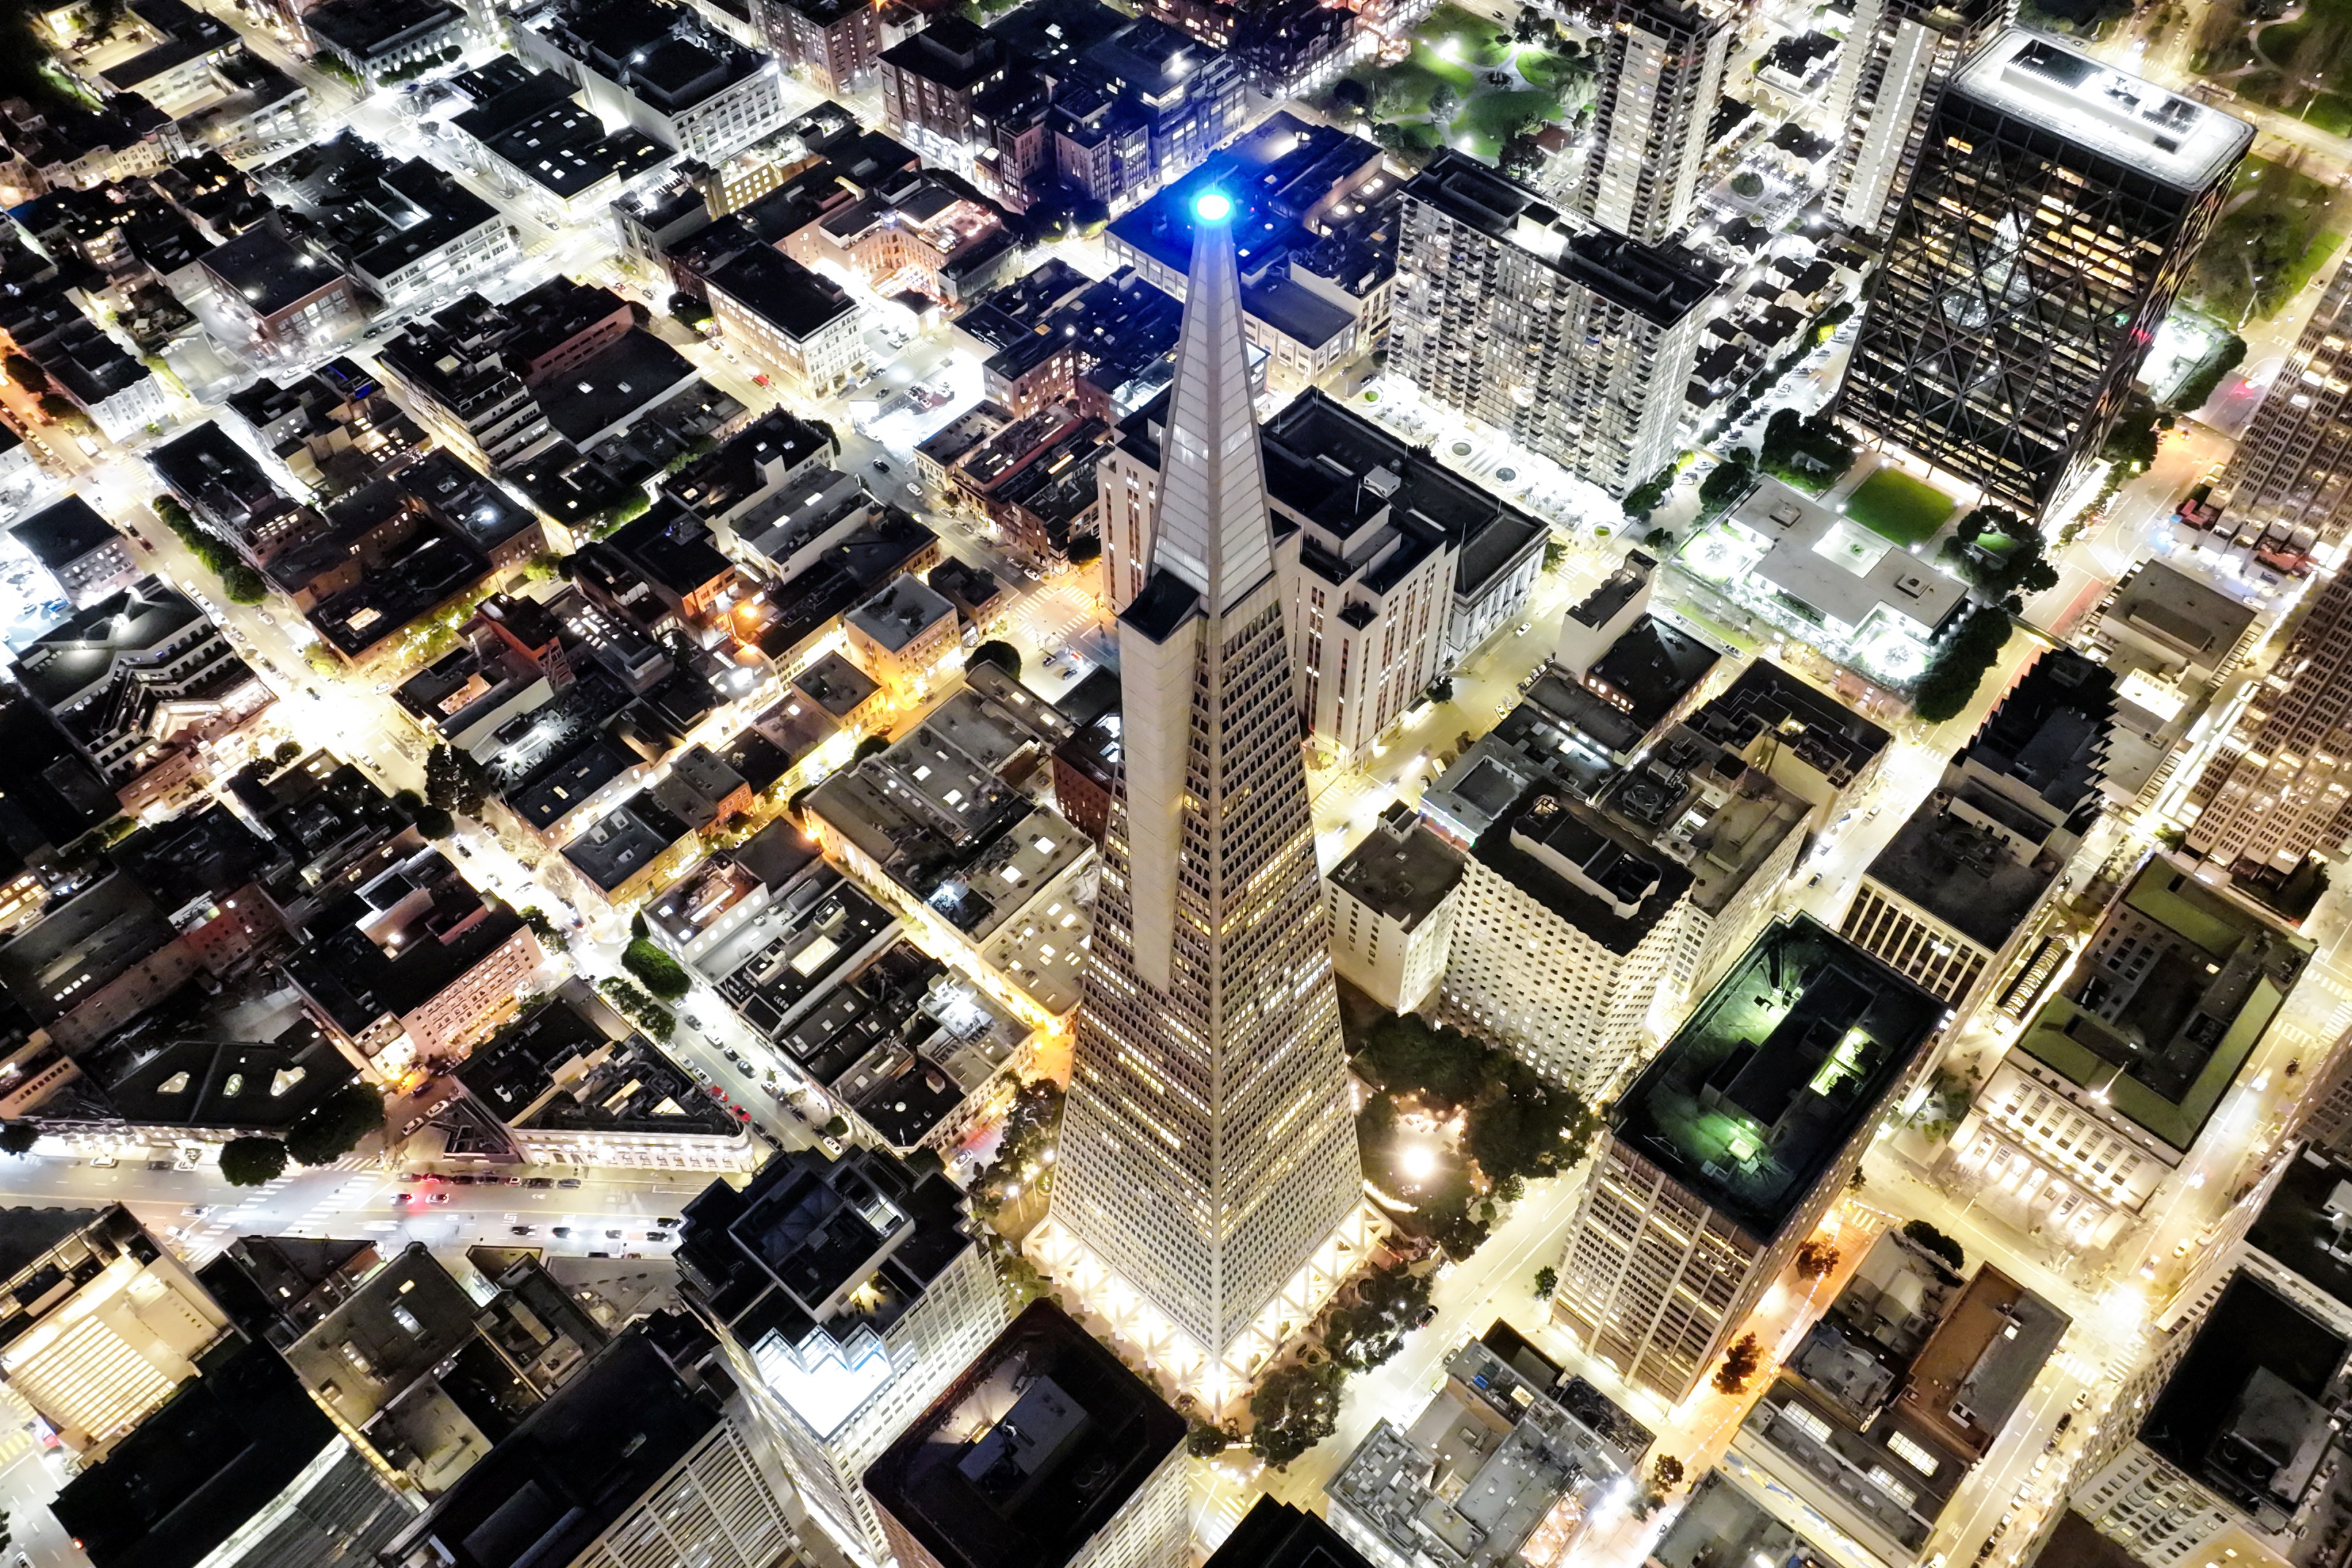 Aerial night view of a brightly lit city with a tall illuminated skyscraper at the center.